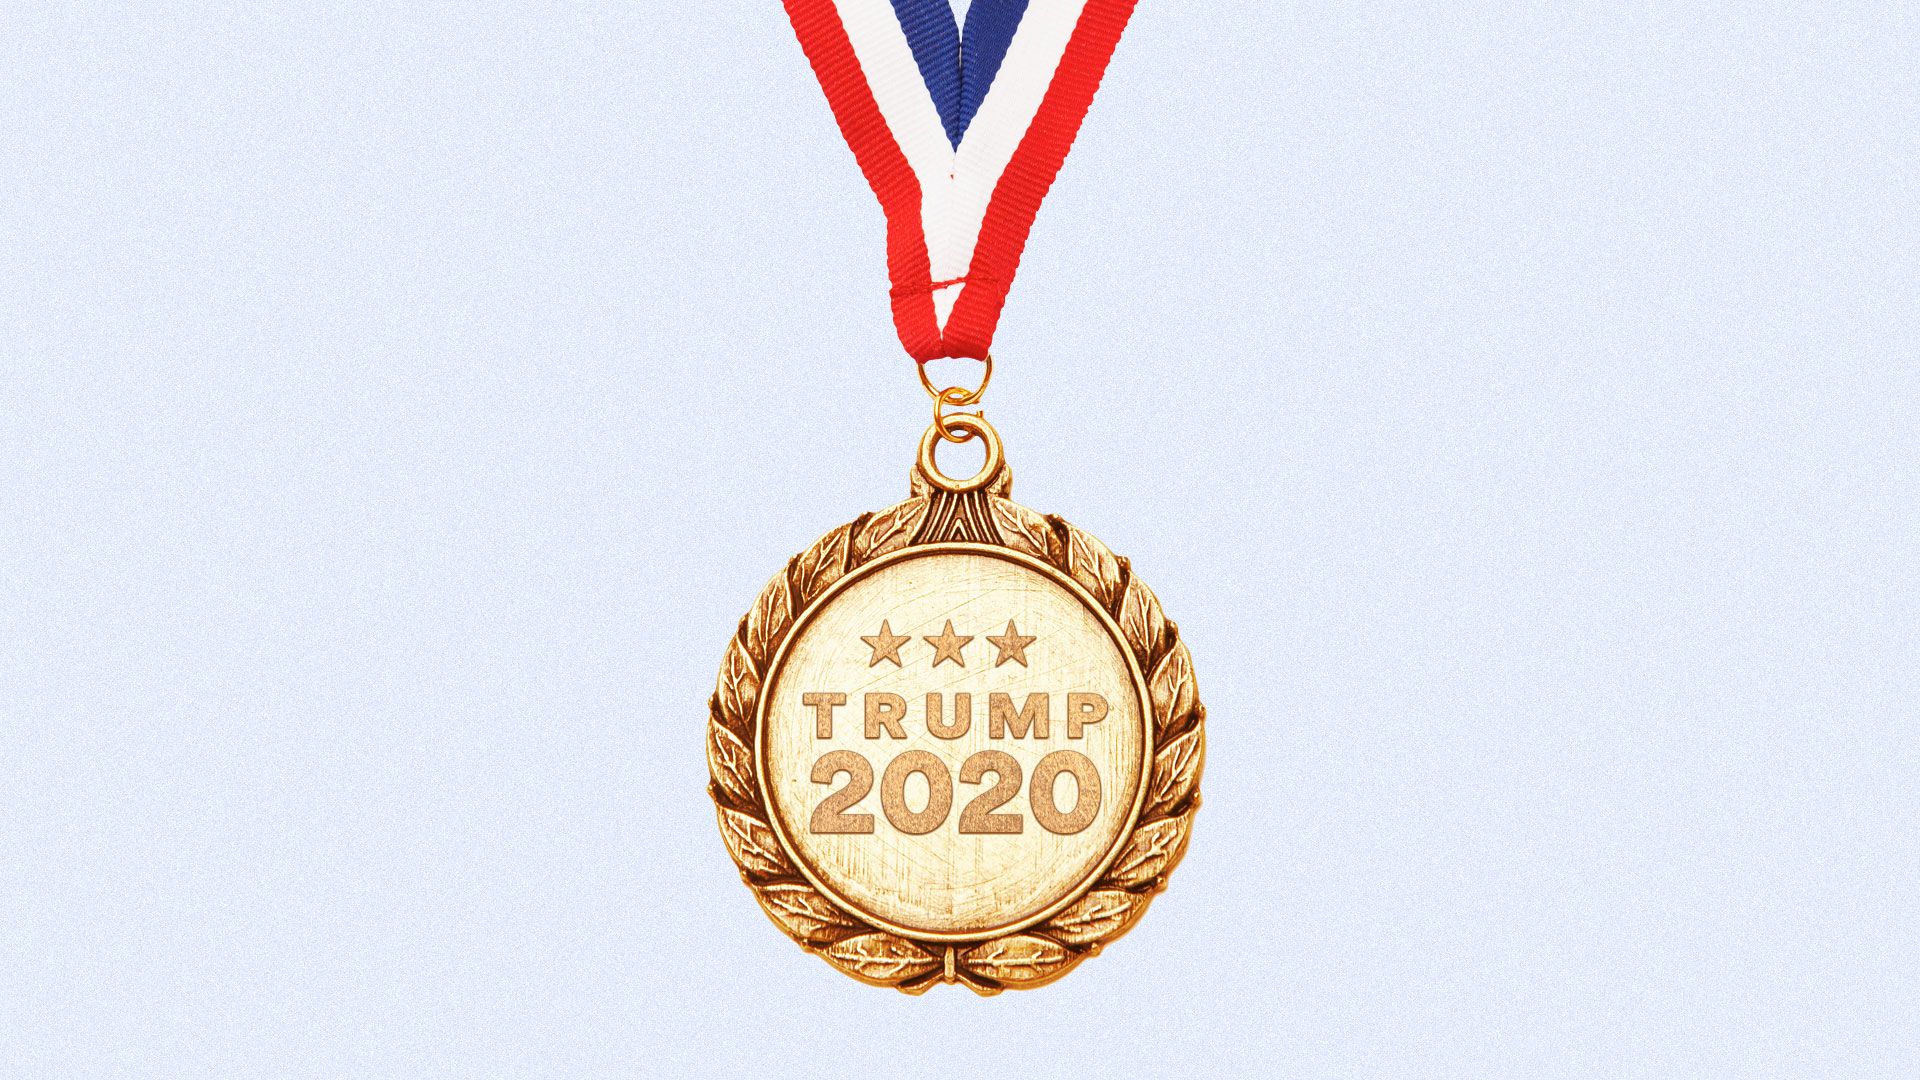 Illustration of a gold medal with Trump 2020.